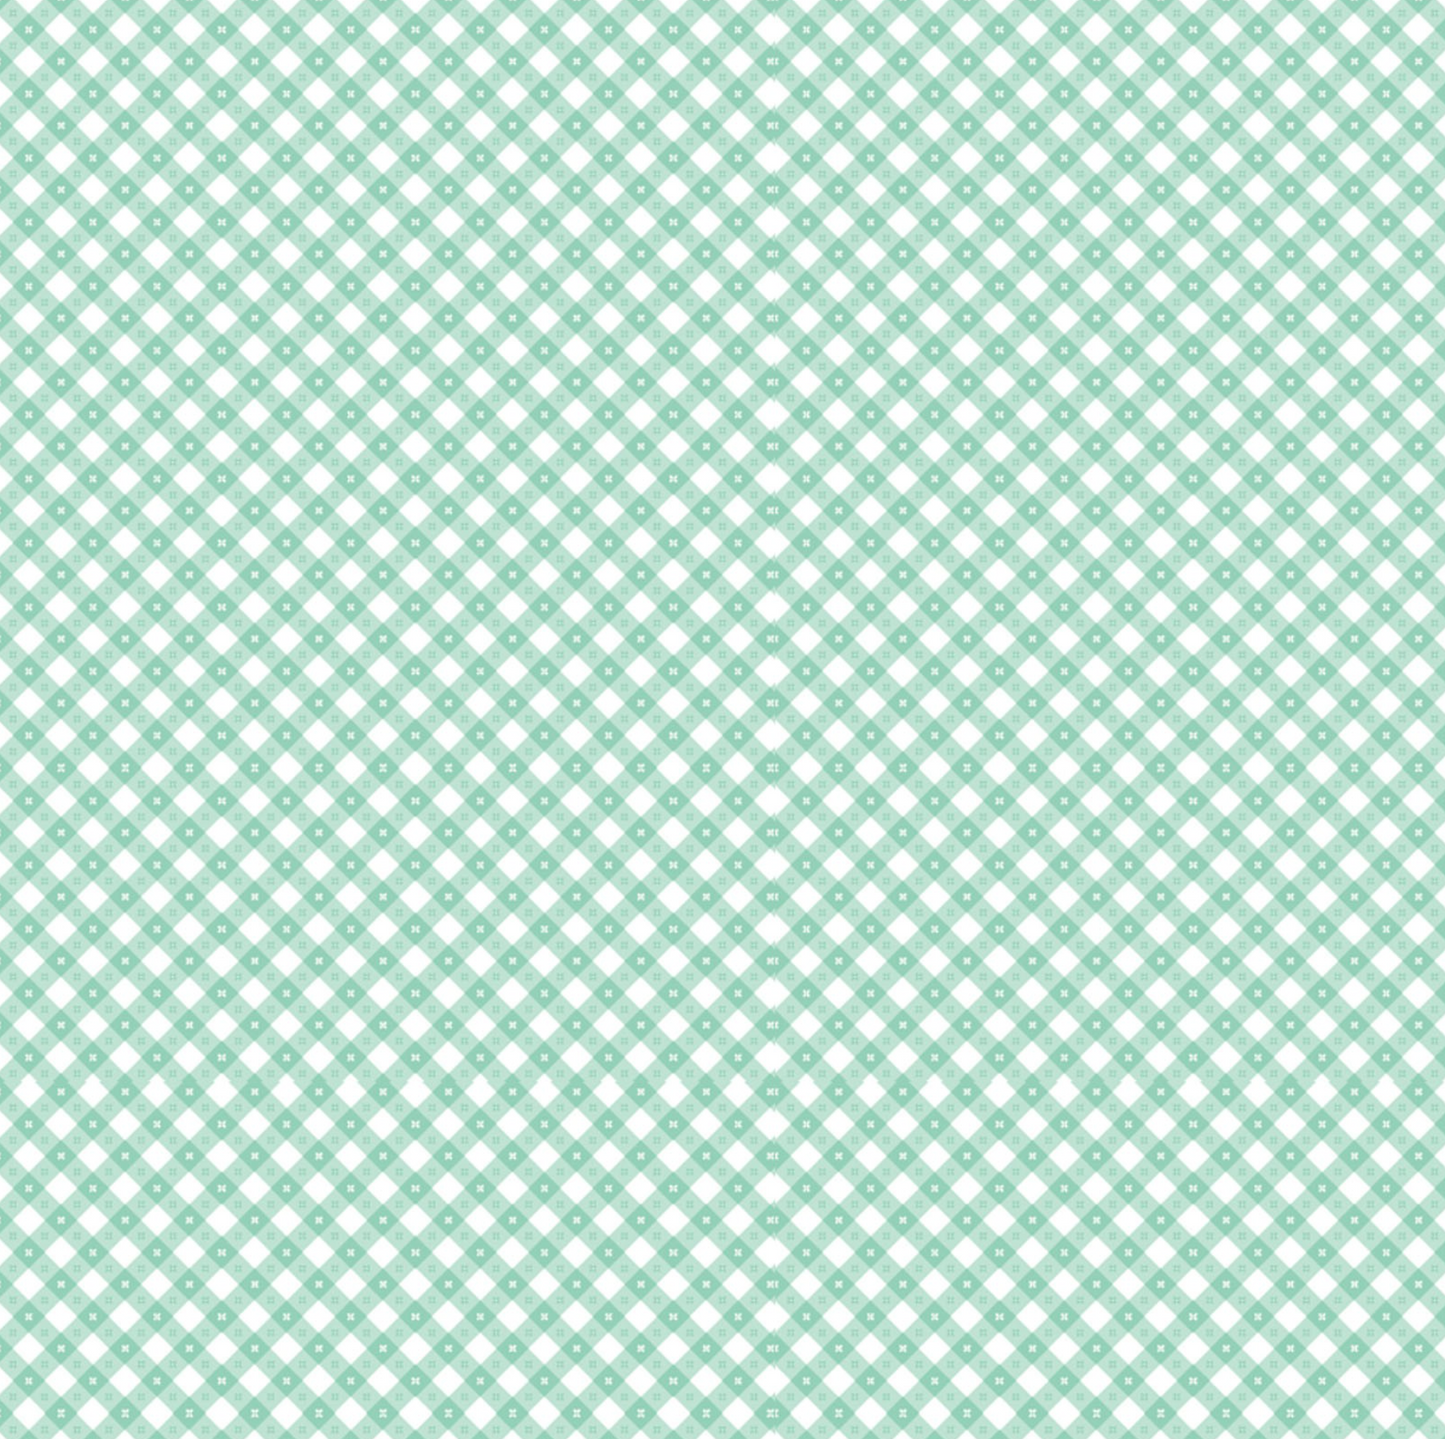 Gingham Picnic Mint Cool Pool GP21217, sold by the 1/2 yard